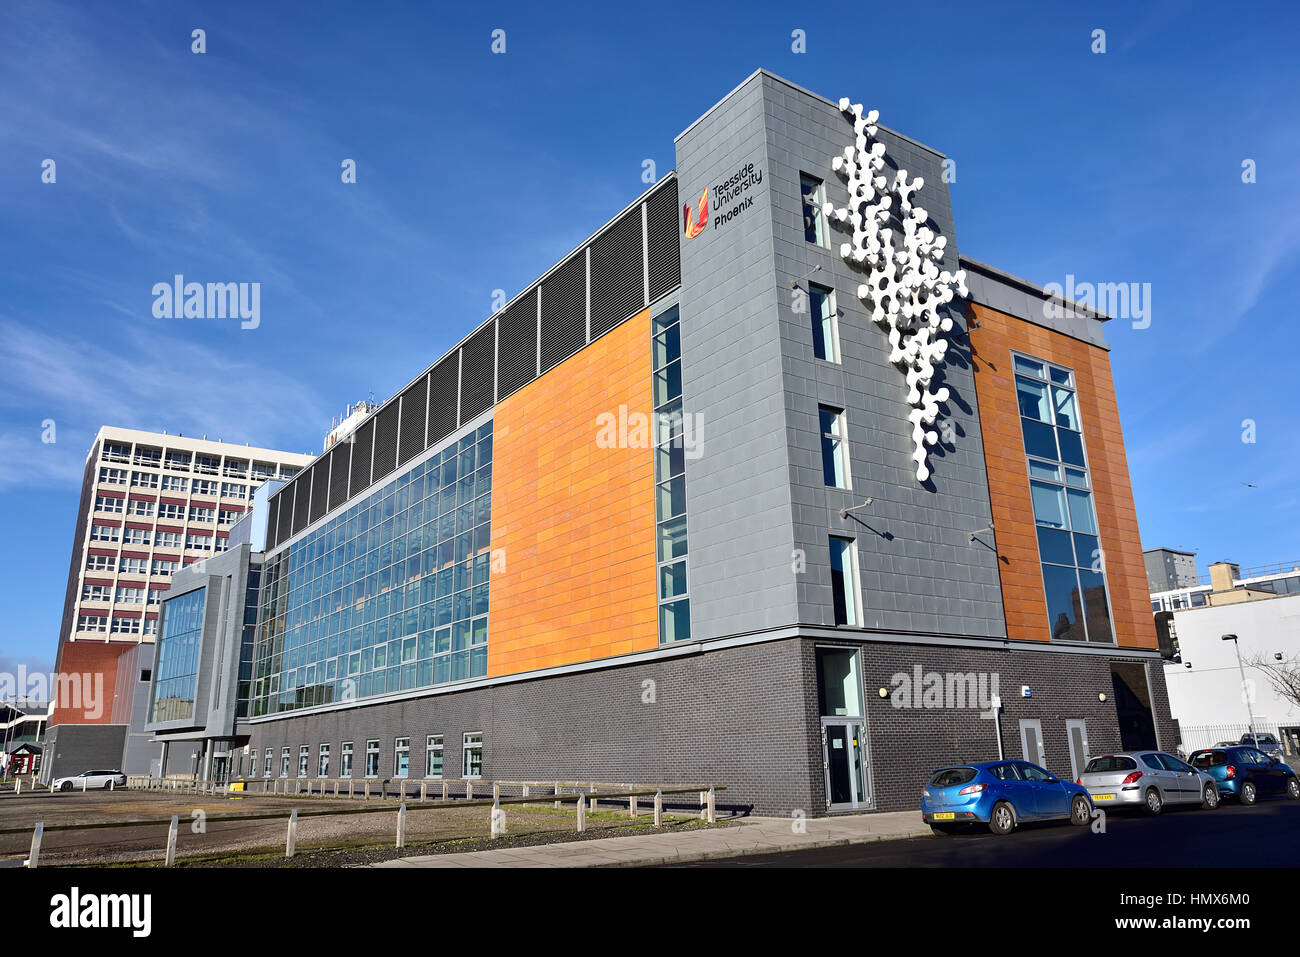 Phoenix Building, Teesside University, showing the conspicuous logo and the eye-catching blocks of colour. Used for digital business etc. Stock Photo